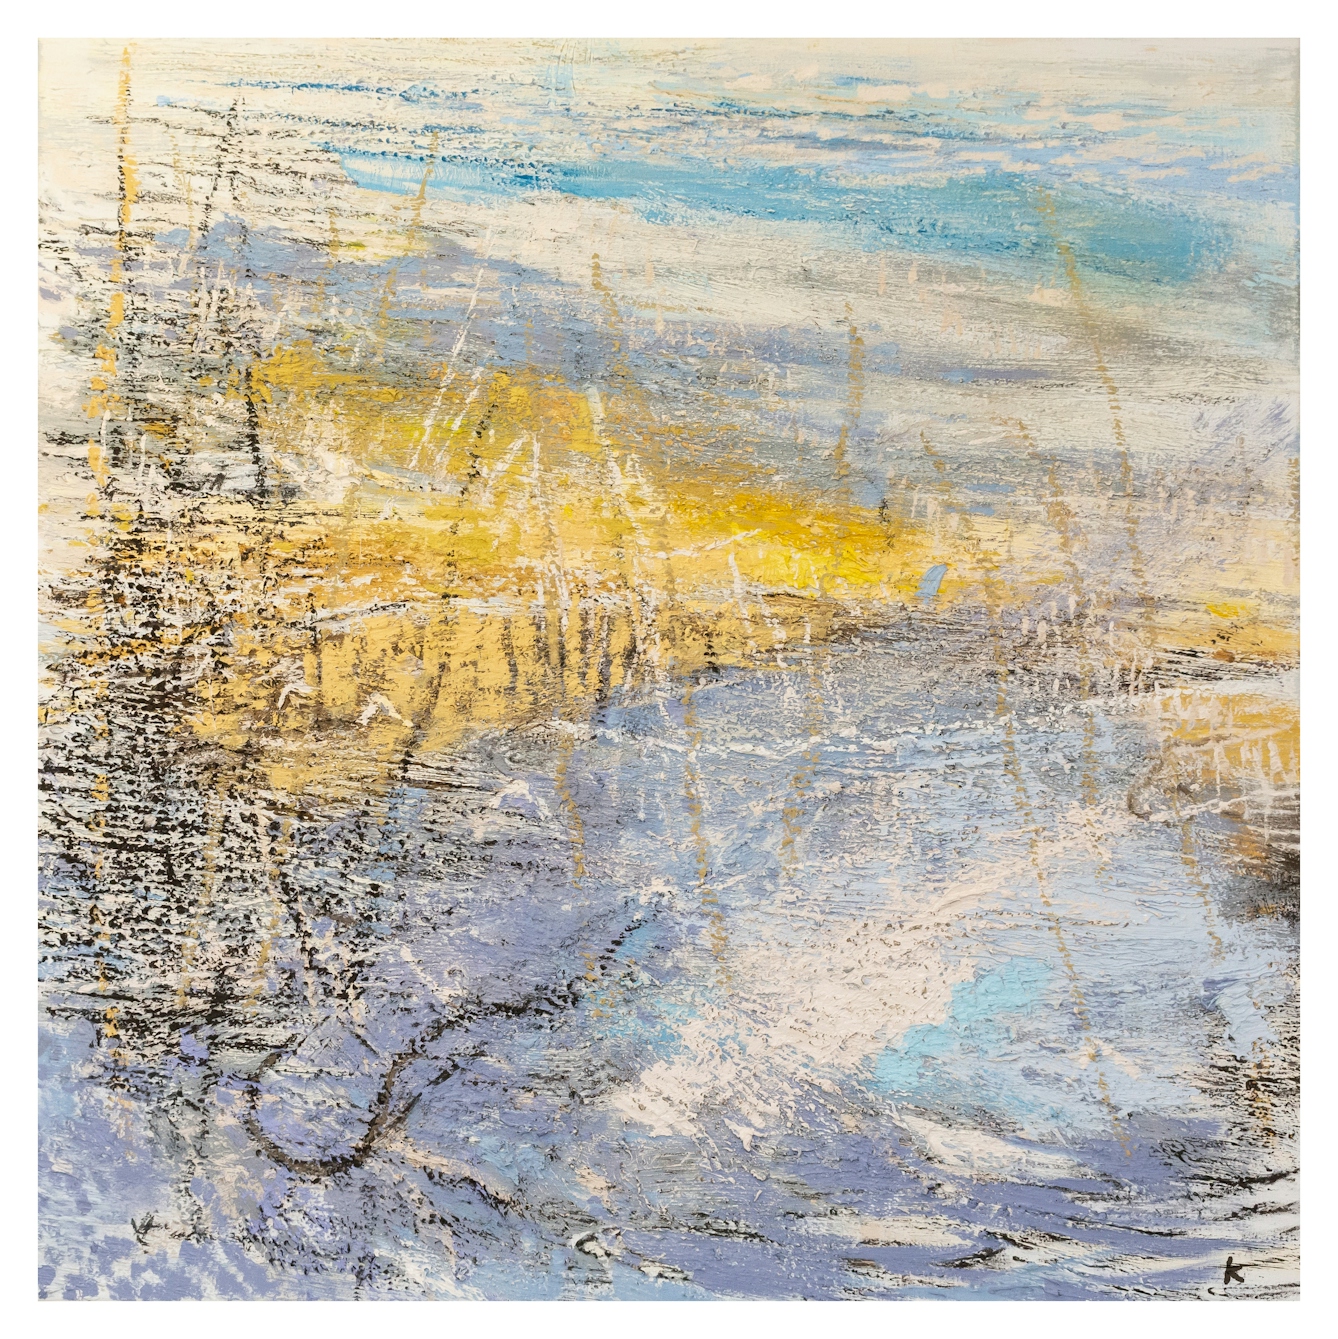 Oil on canvas artwork depicting an abstract, impressionist landscape made with heavily textured oil paint brushstrokes. The painting is made up of yellow, blue and purple hues